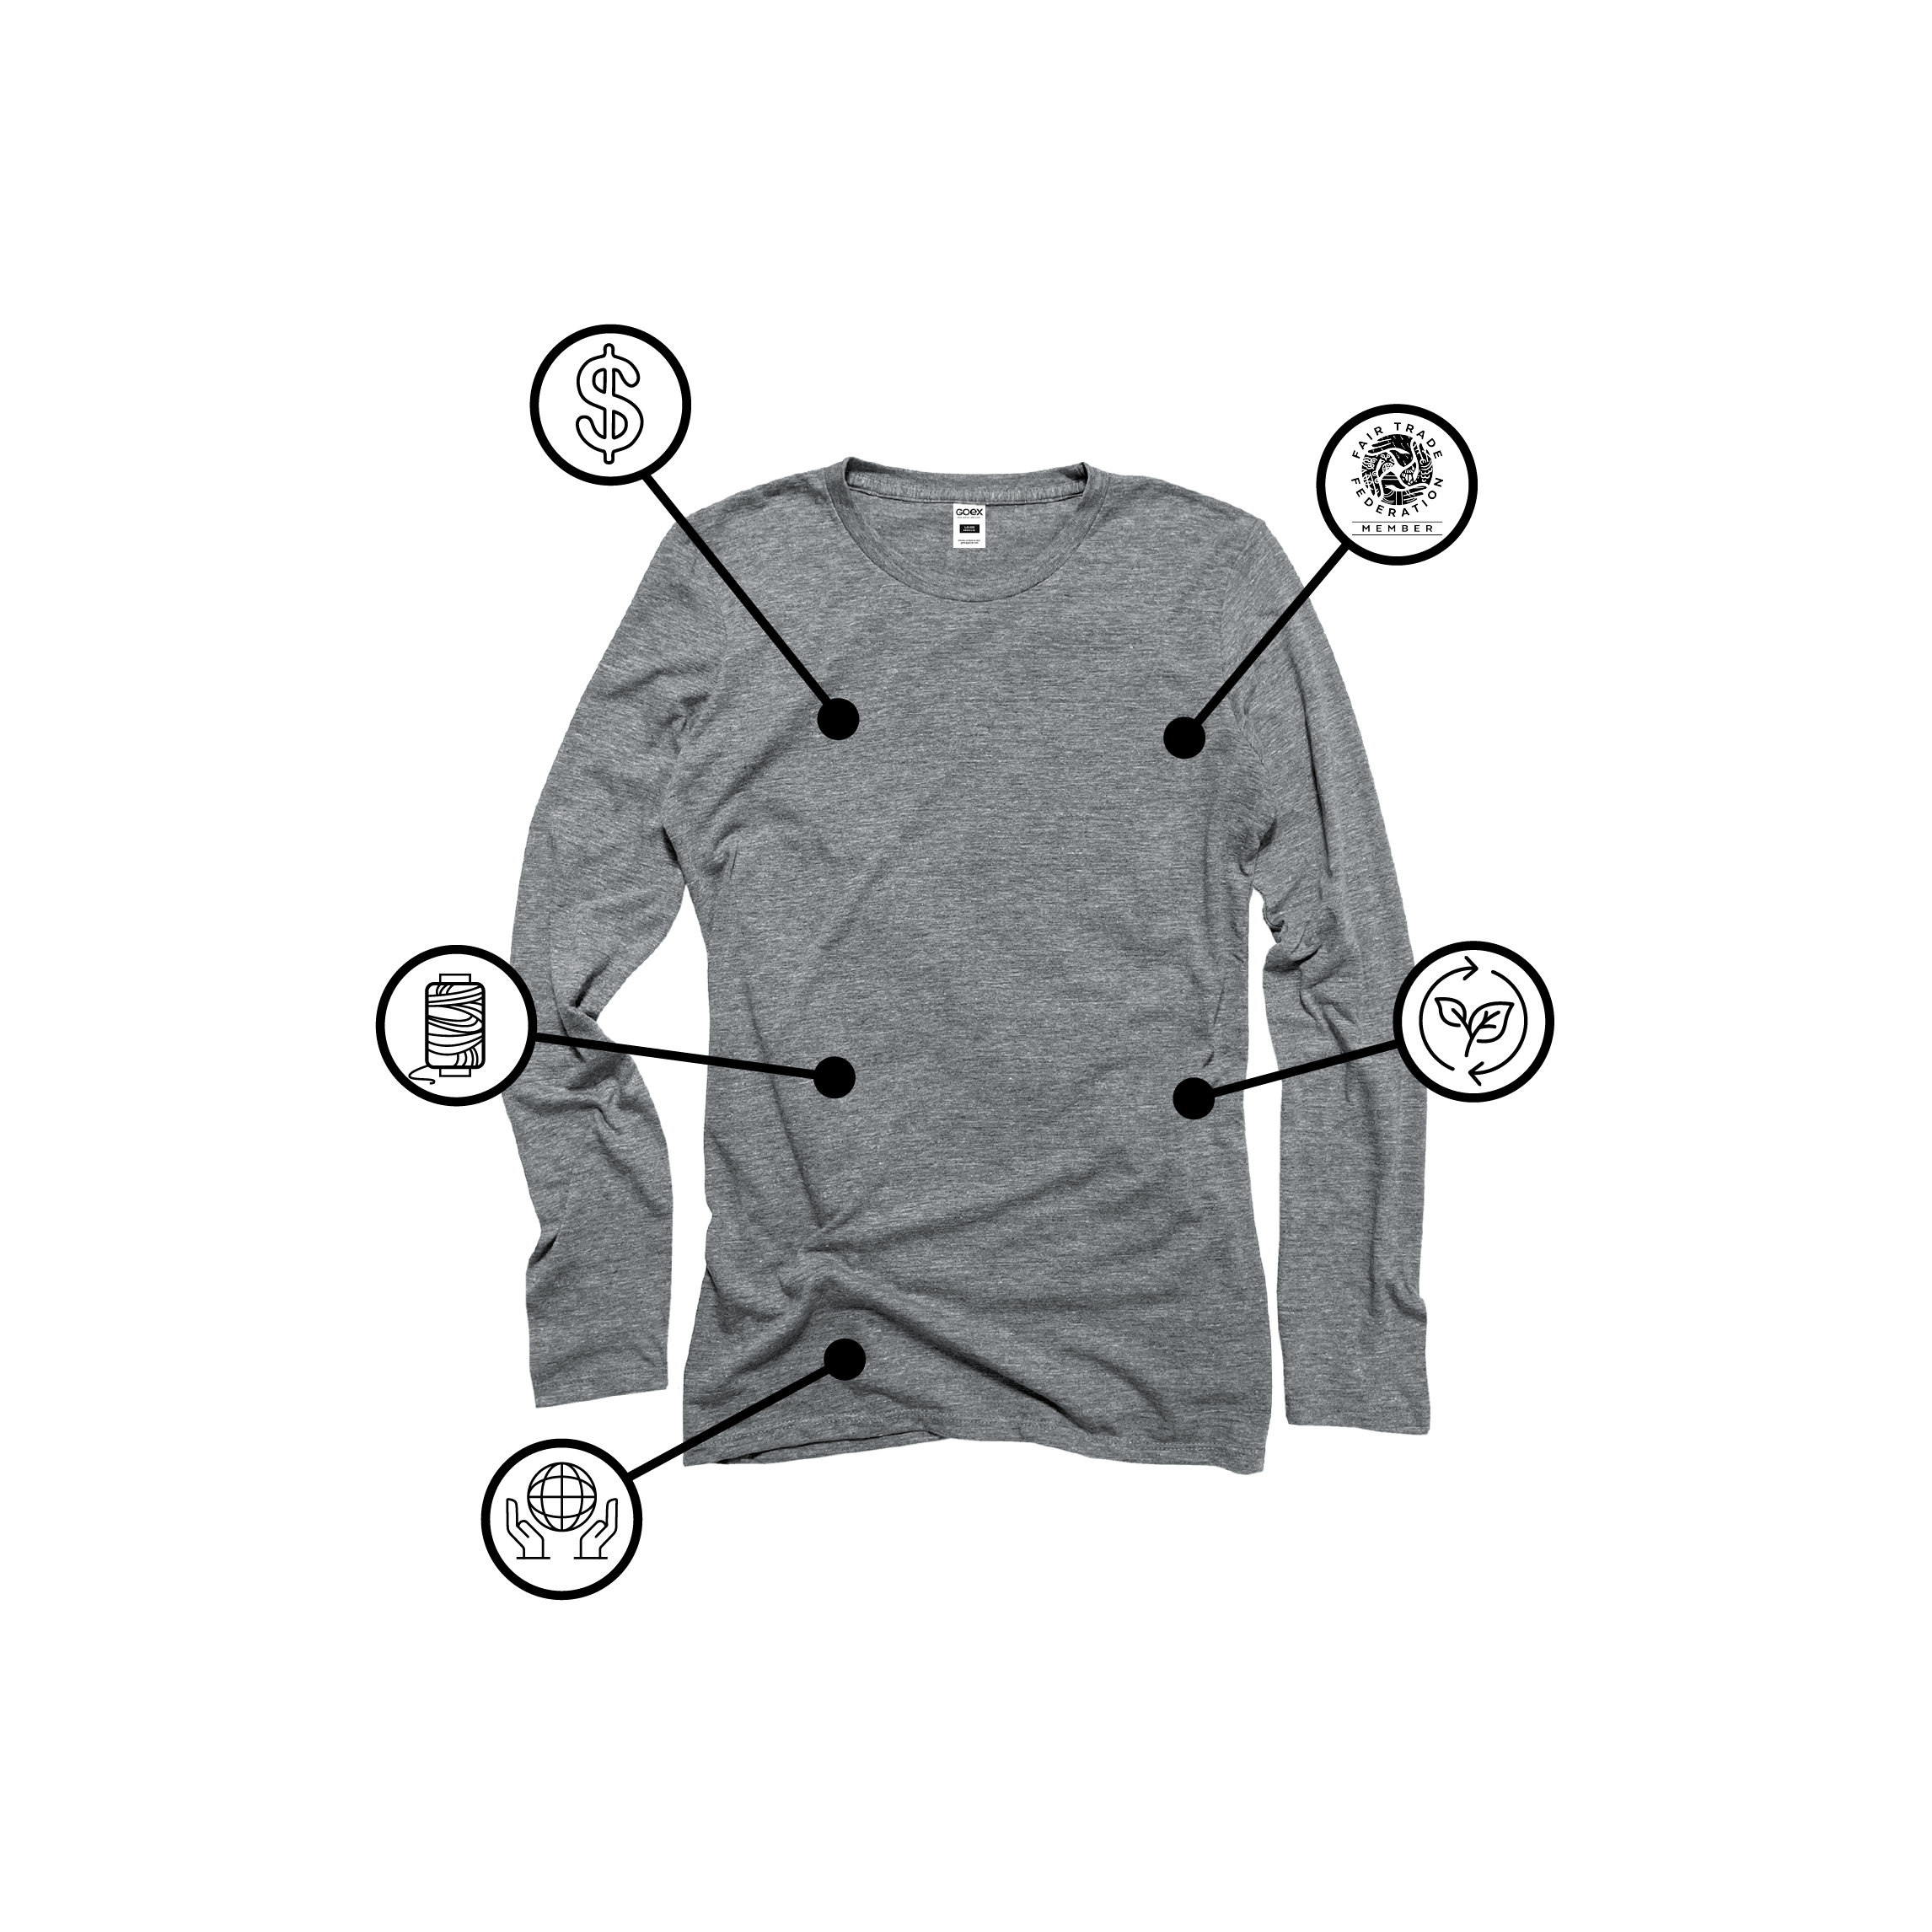 GOEX Apparel Ladies Long Sleeve Eco Triblend Tee in Heather Grey with Icons